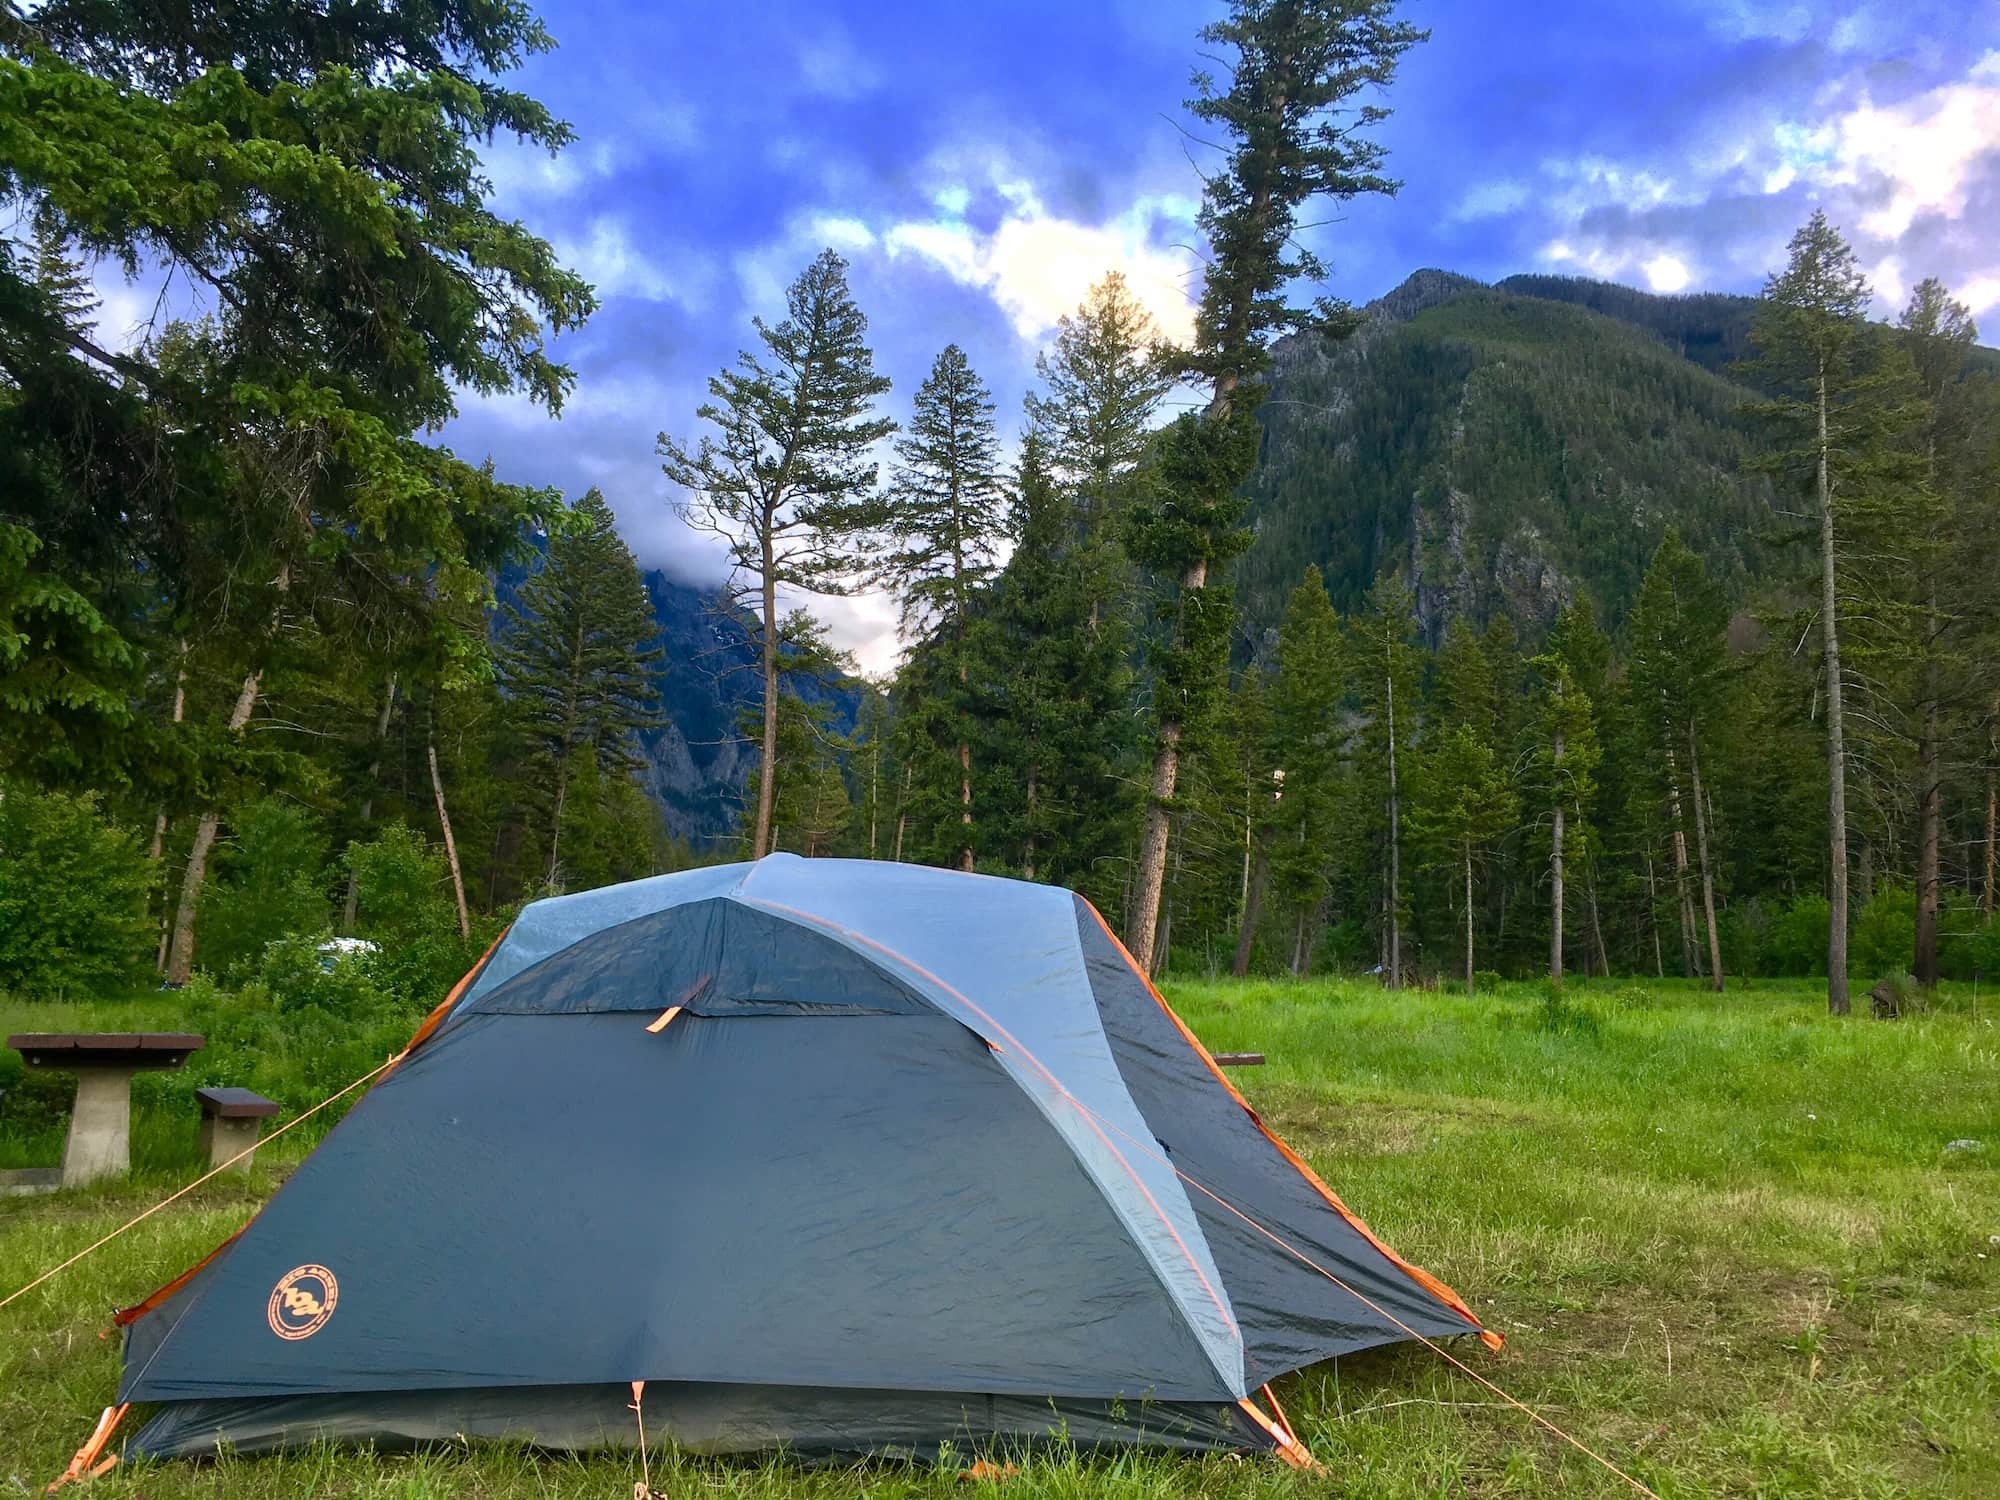 Tent in the foreground with Bozeman mountains in the background.